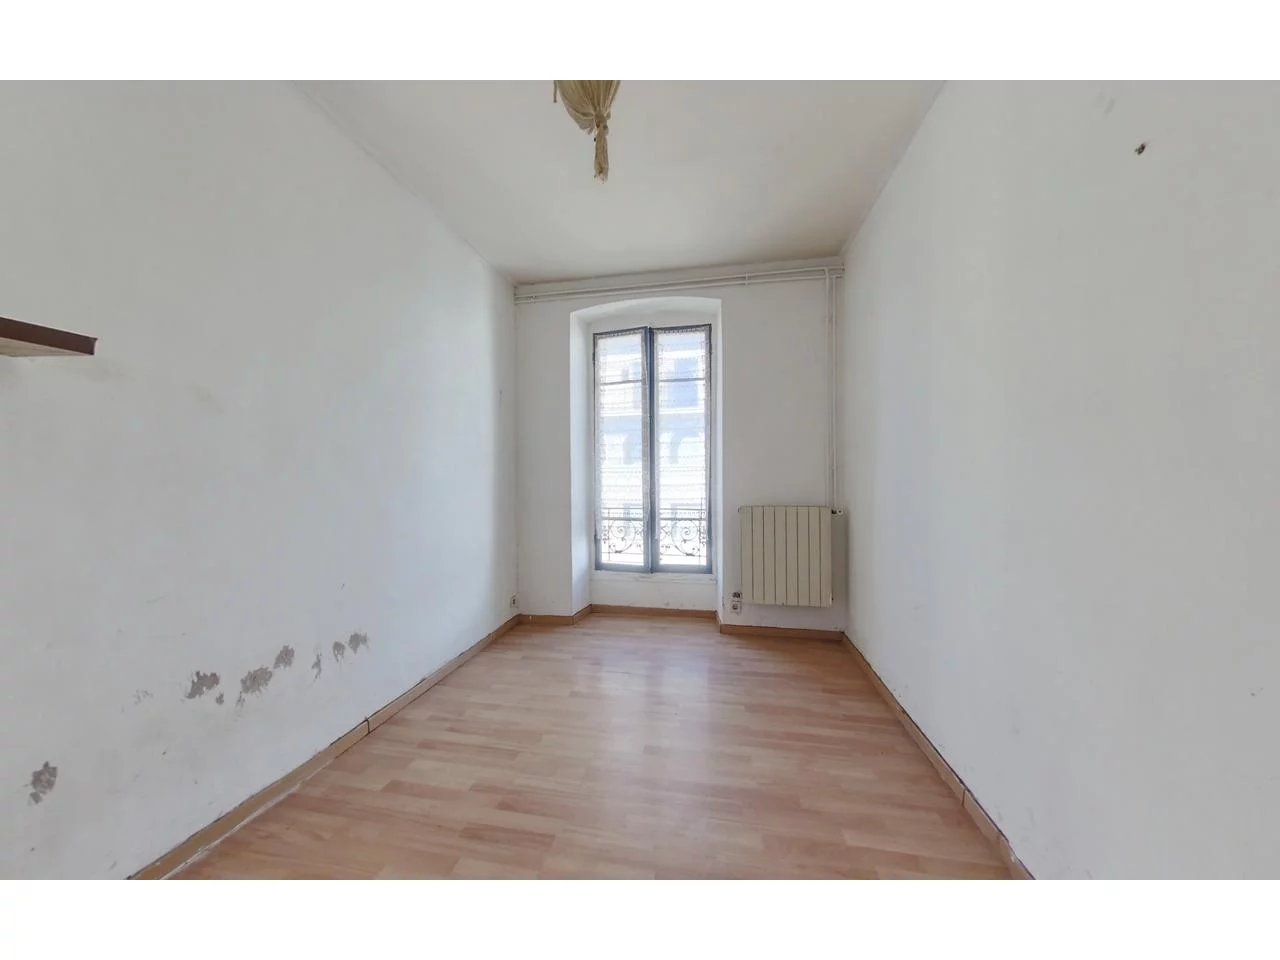 Appartement  3 Rooms 54m2  for sale   227 000 €